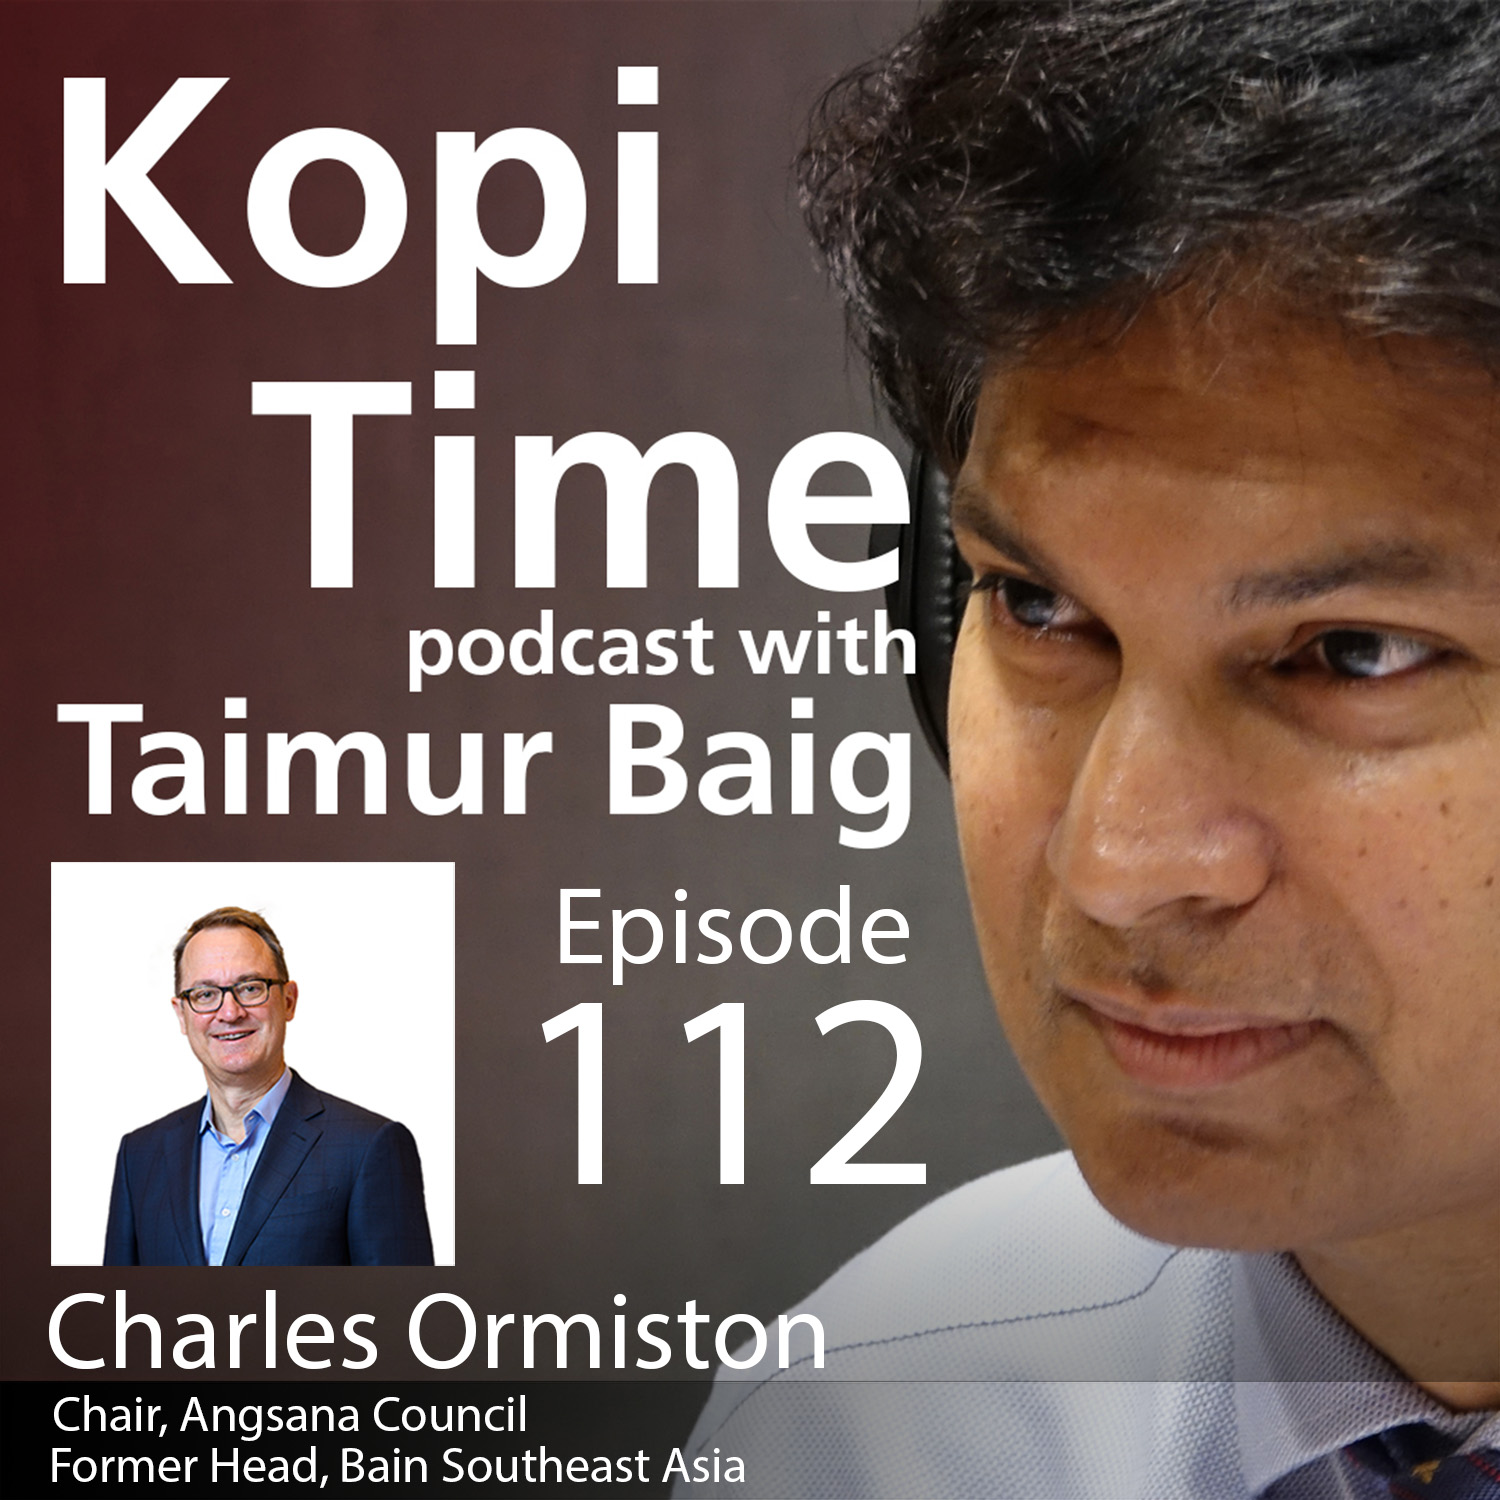 Kopi Time E112 - Charles Ormiston on making the most of out of geopolitics